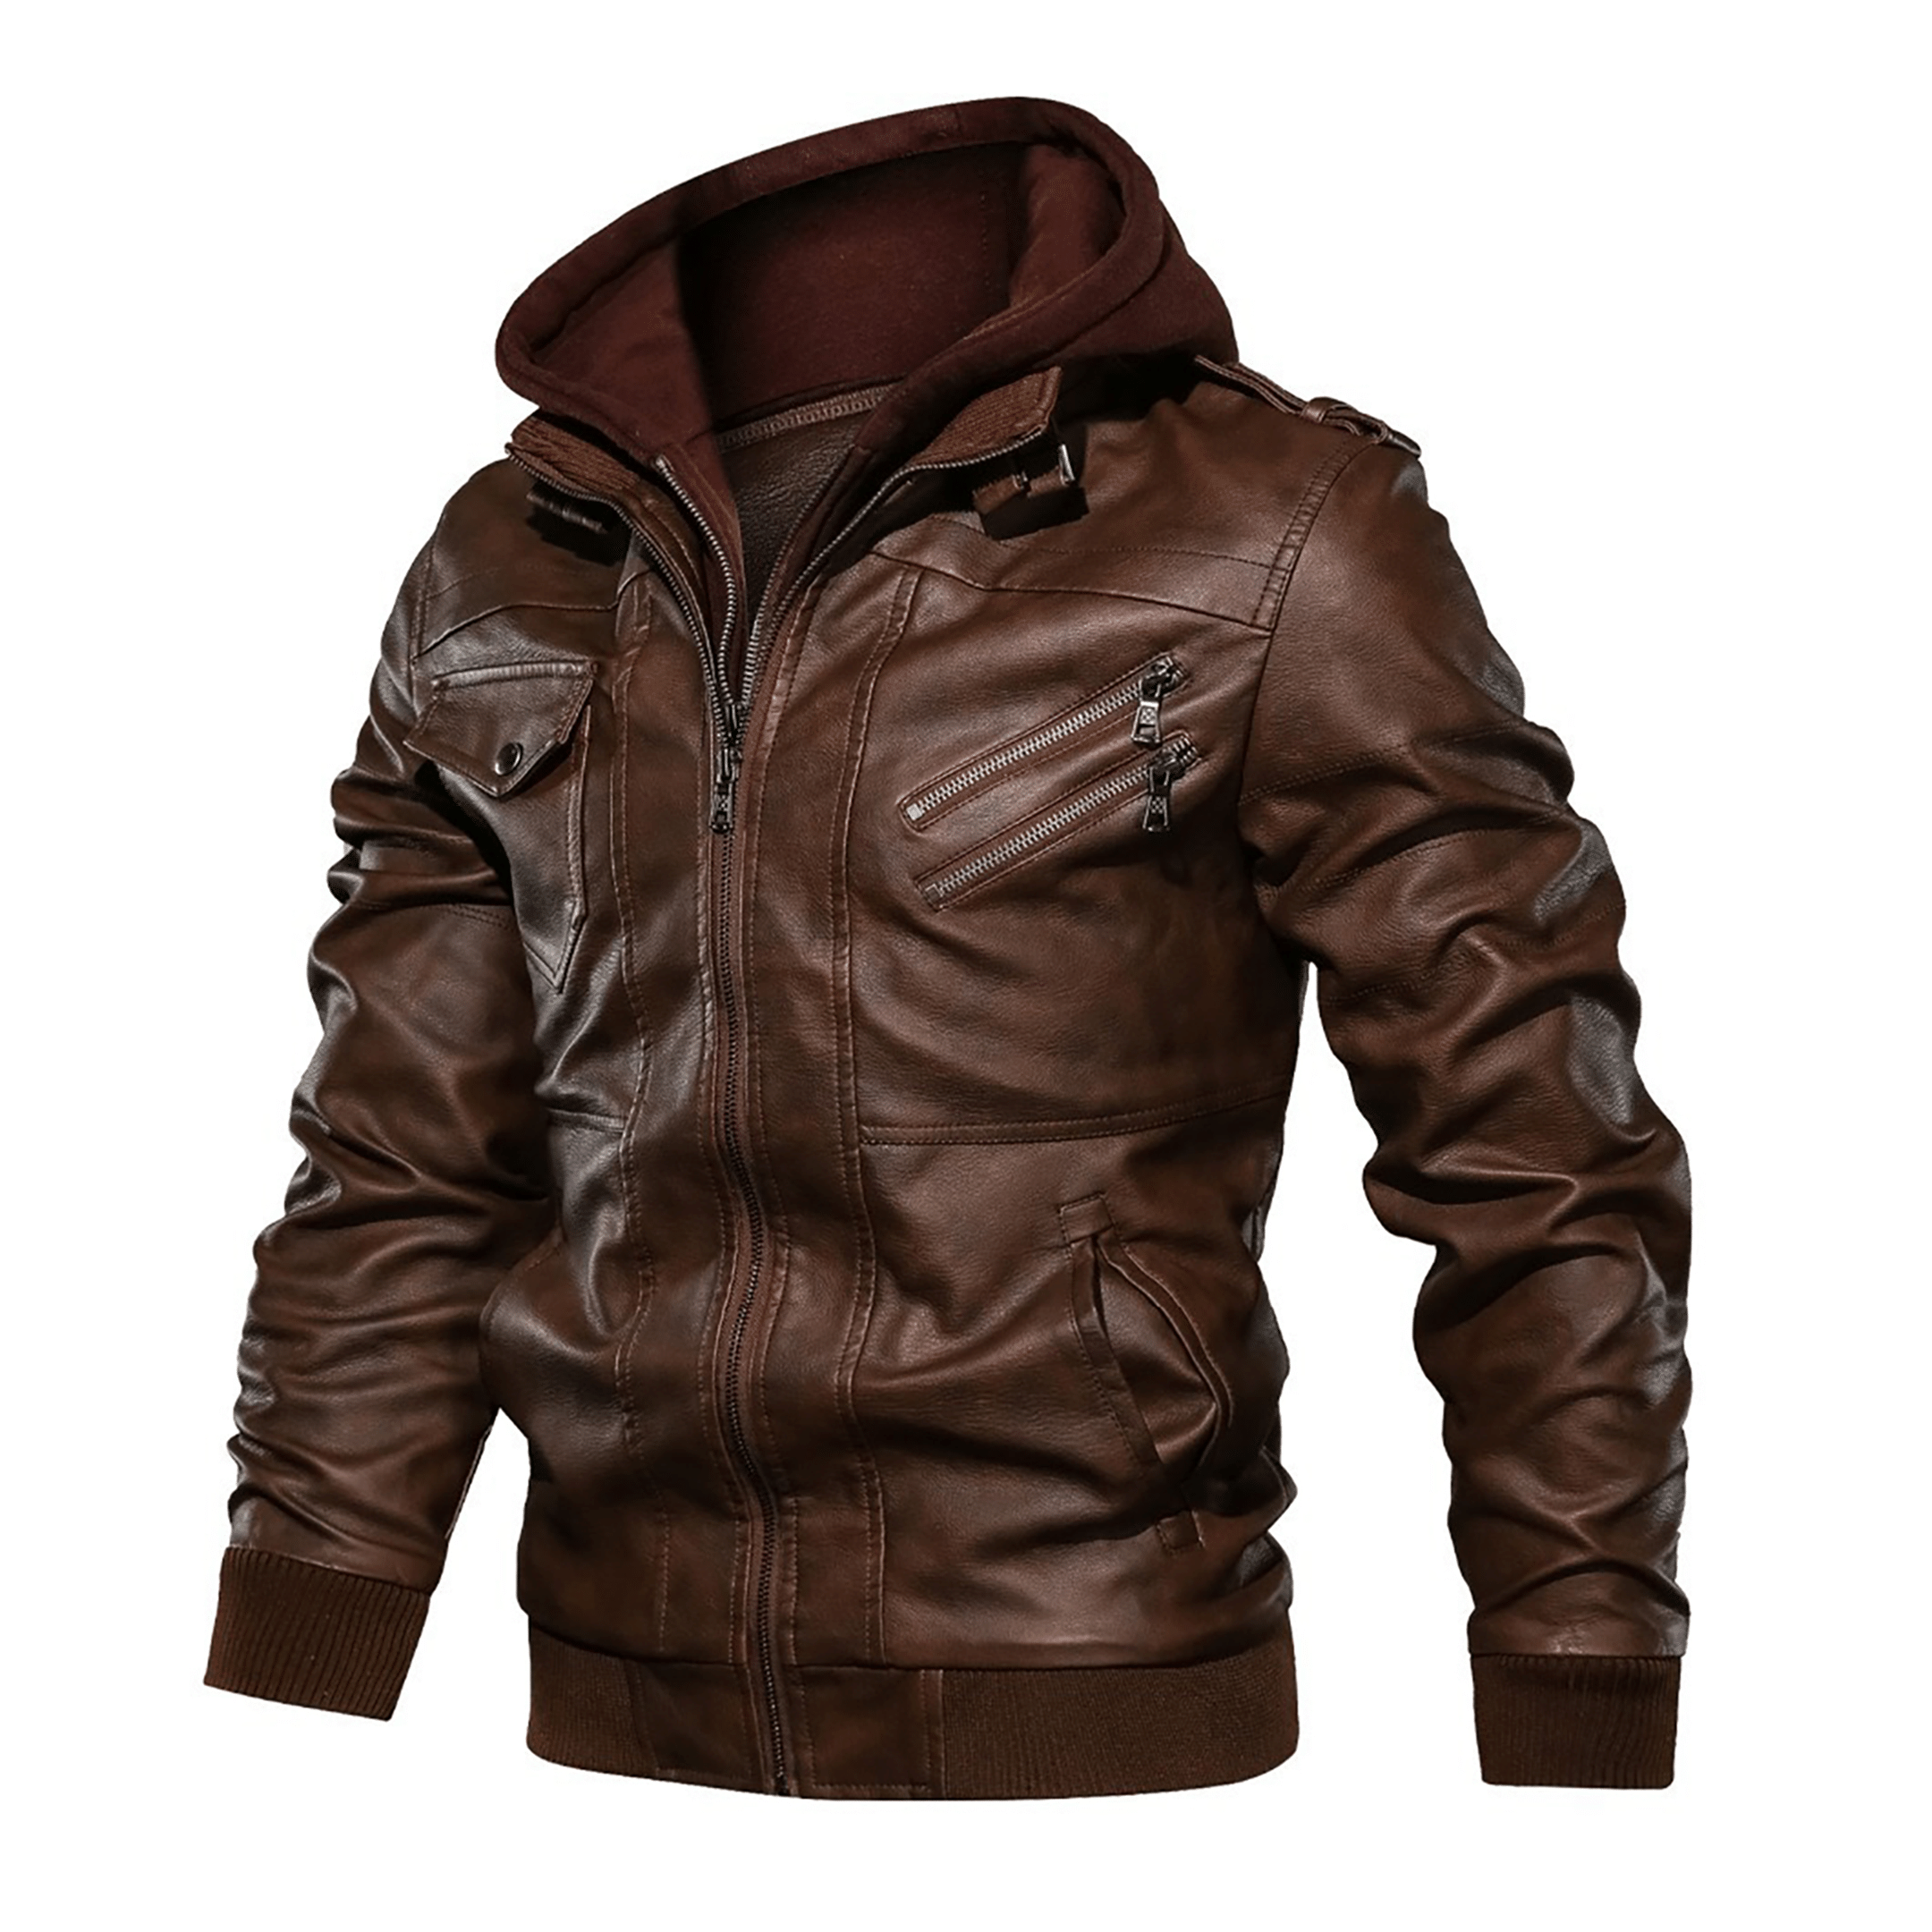 Top leather jackets and latest products 383